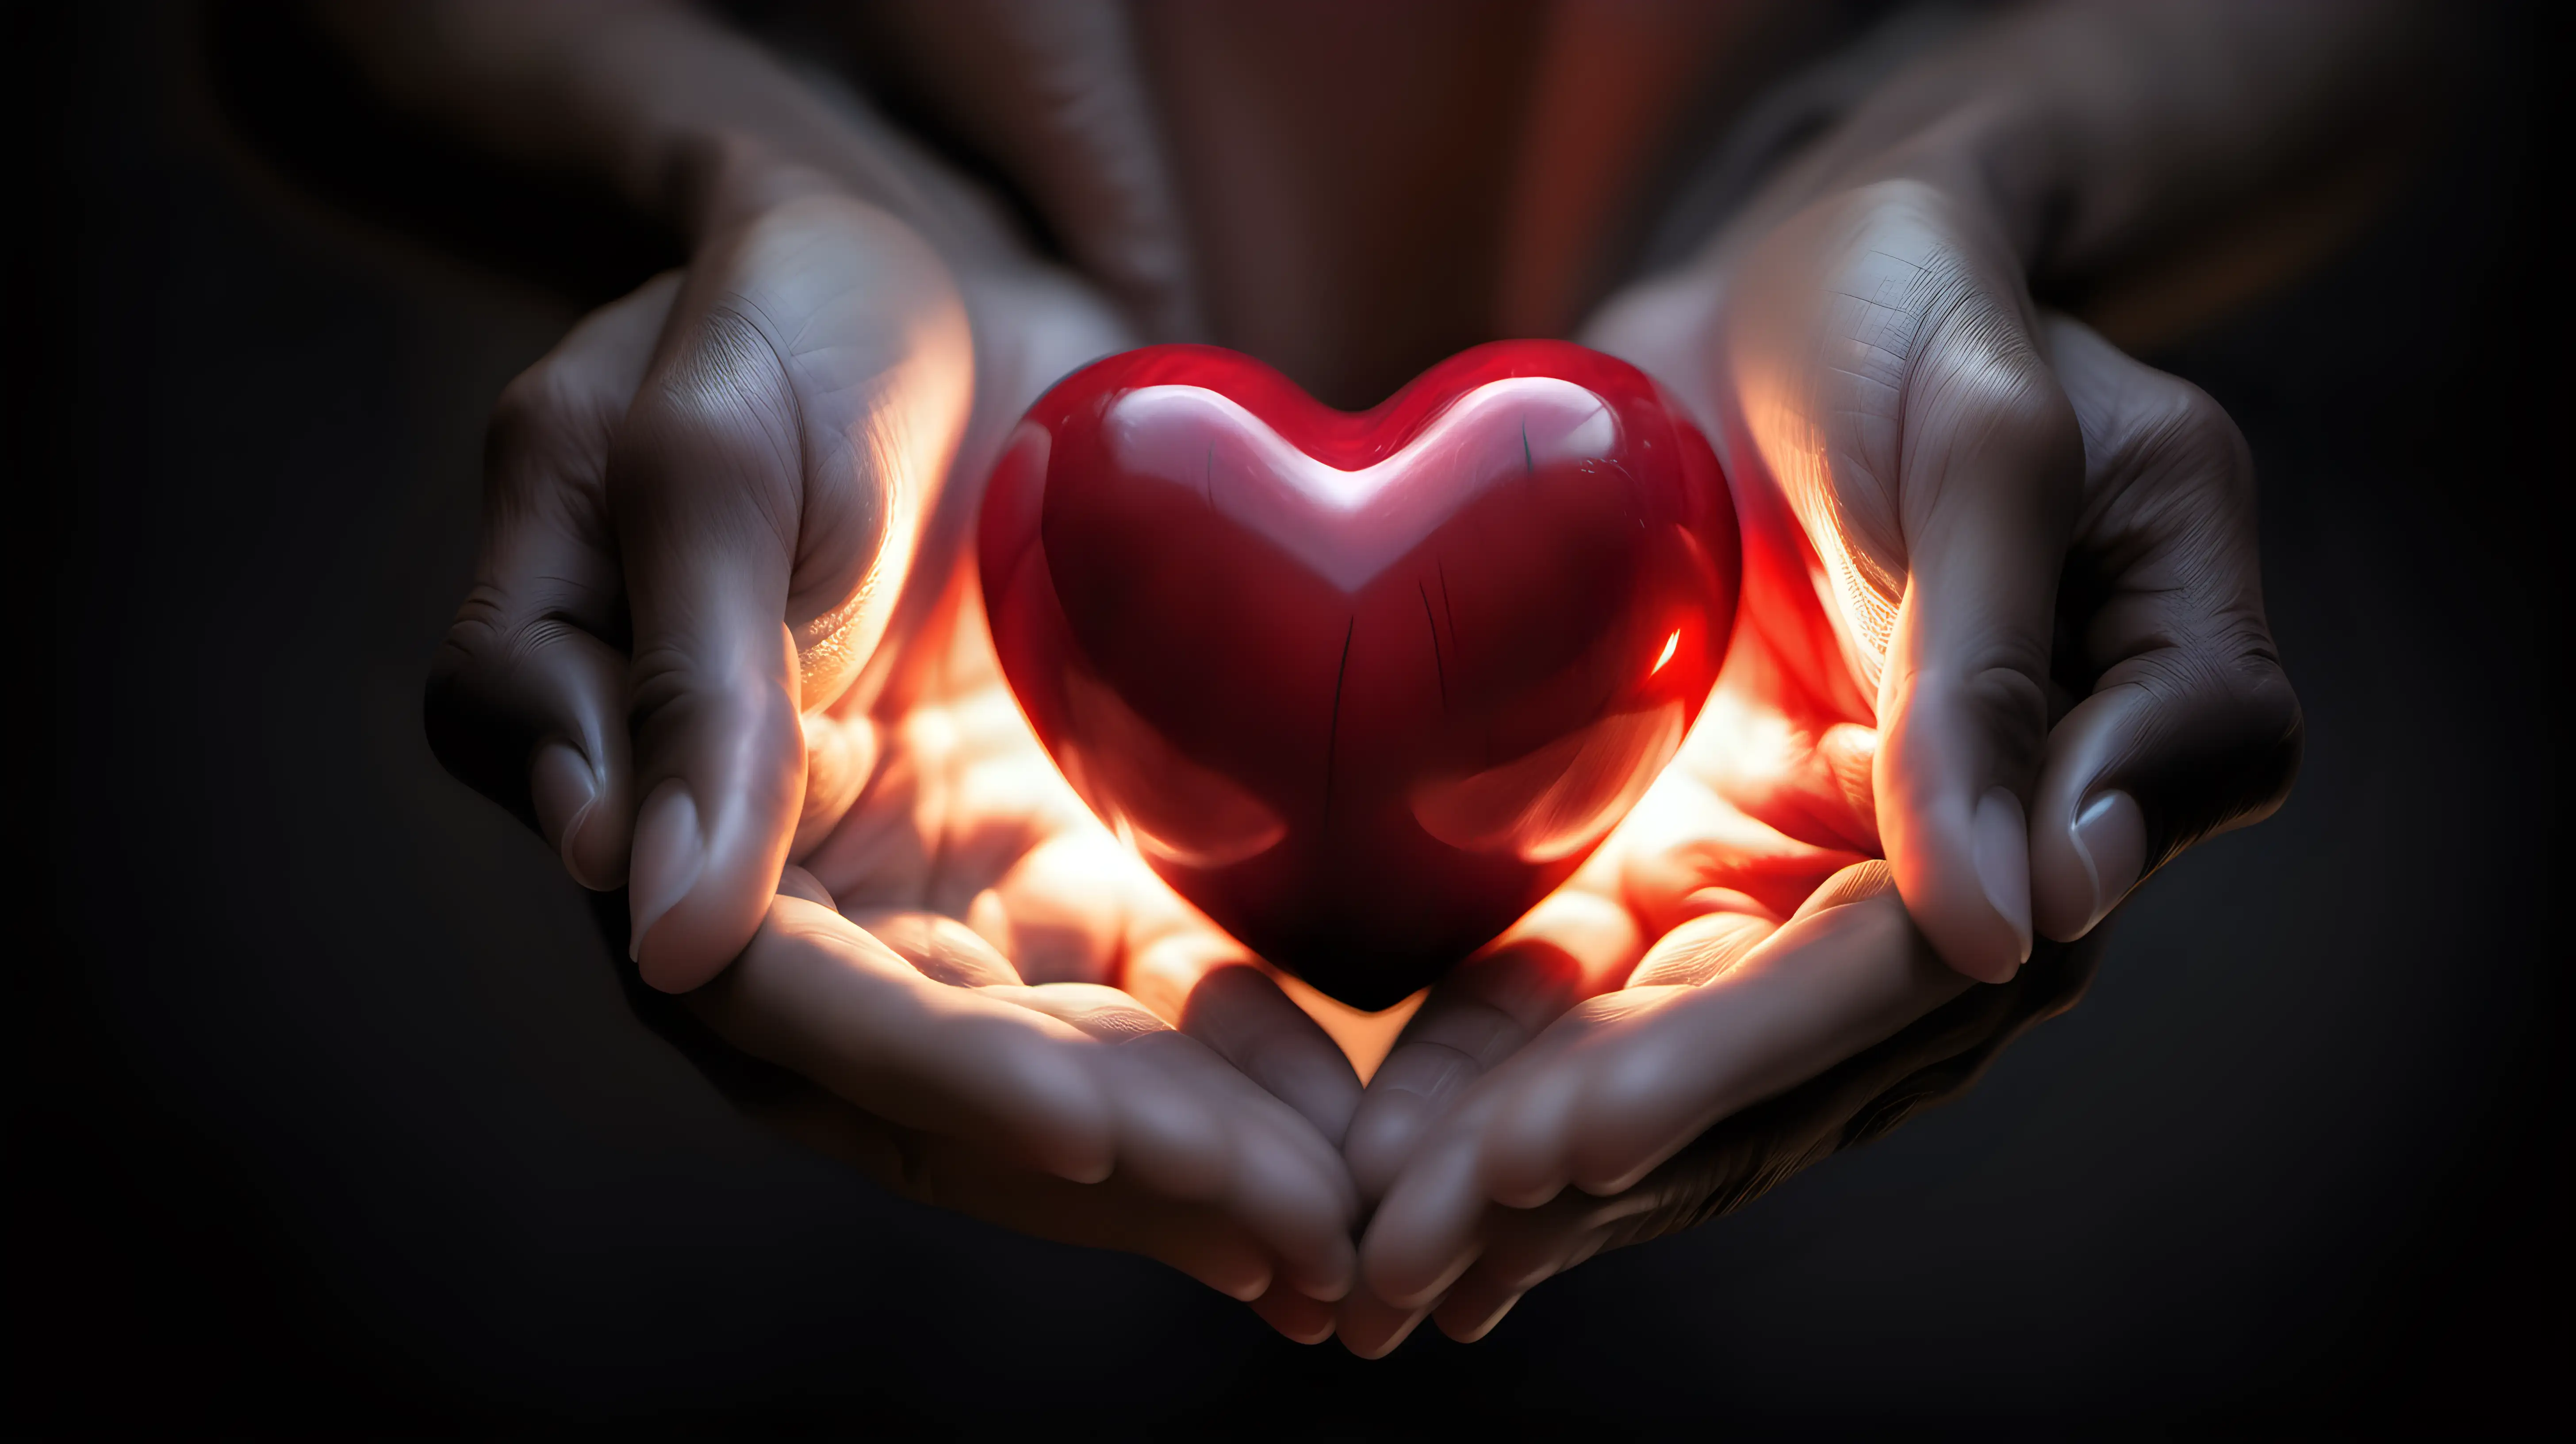 HeartHealthy Lifestyle Concept Holding Glowing Heart with Exercise and Nutrition Imagery